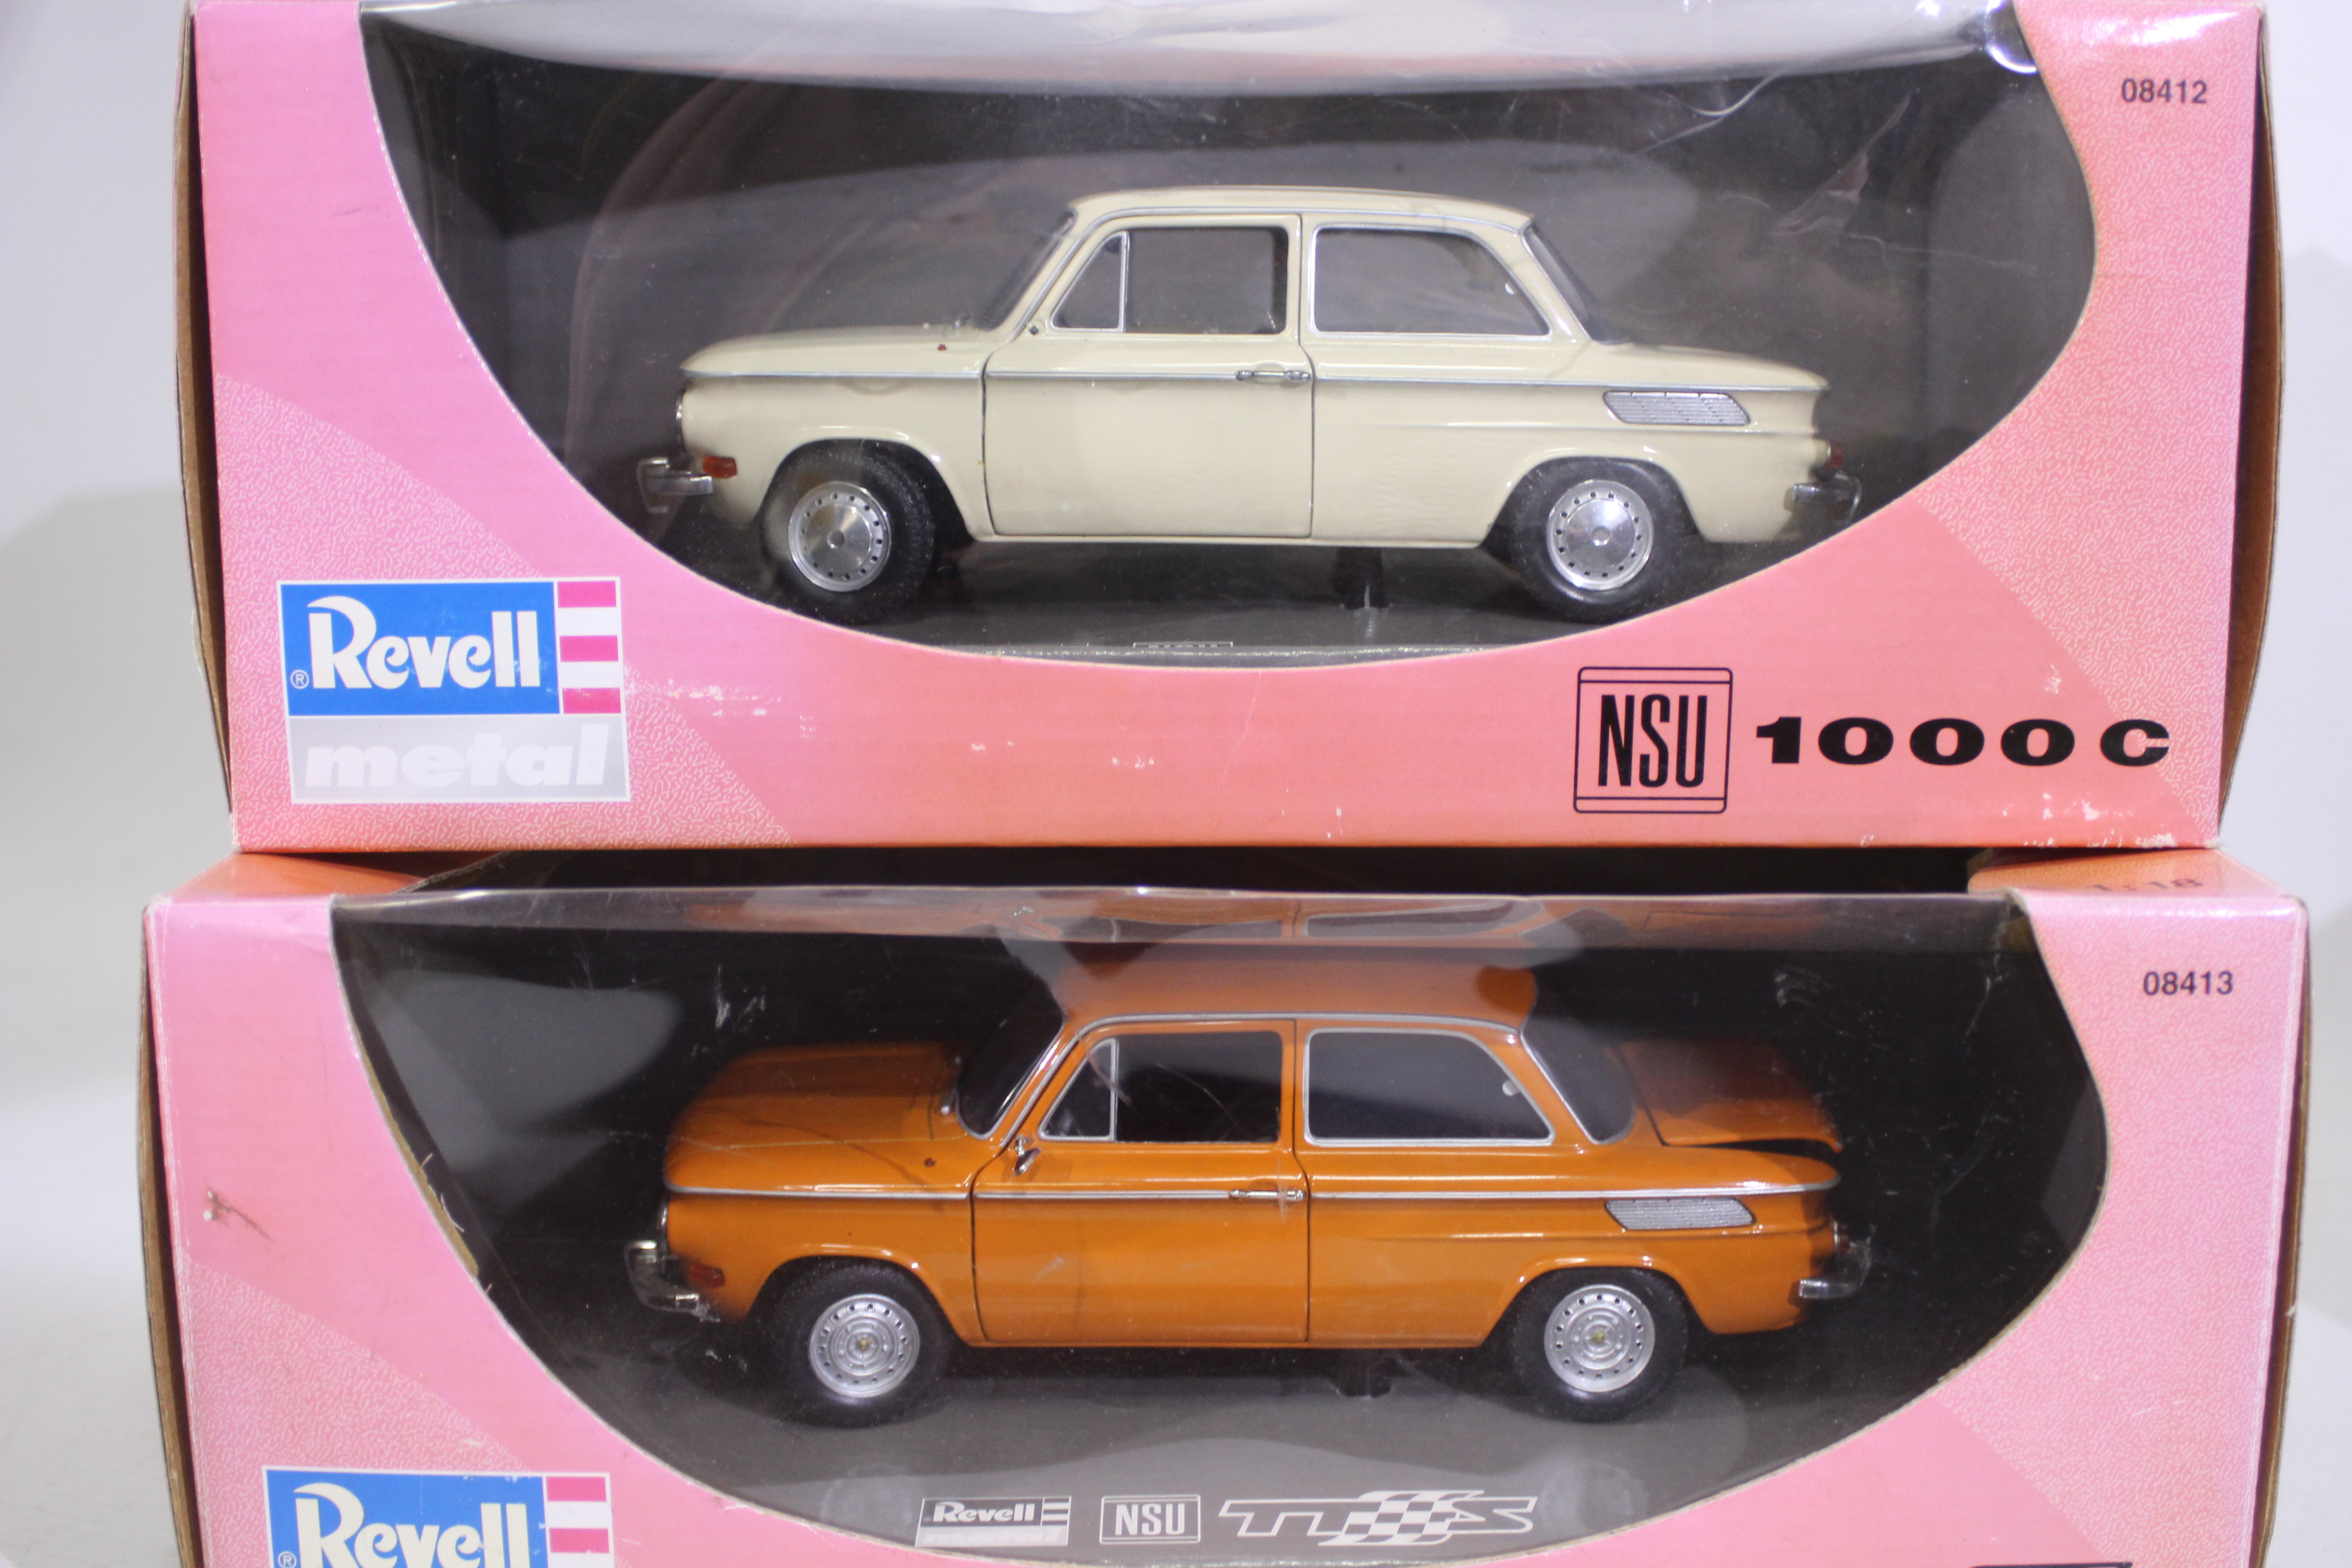 Revell - Norev - 4 x boxed cars in 1:18 scale, Messerschmitt KR200, NSU 1000C, - Image 2 of 4